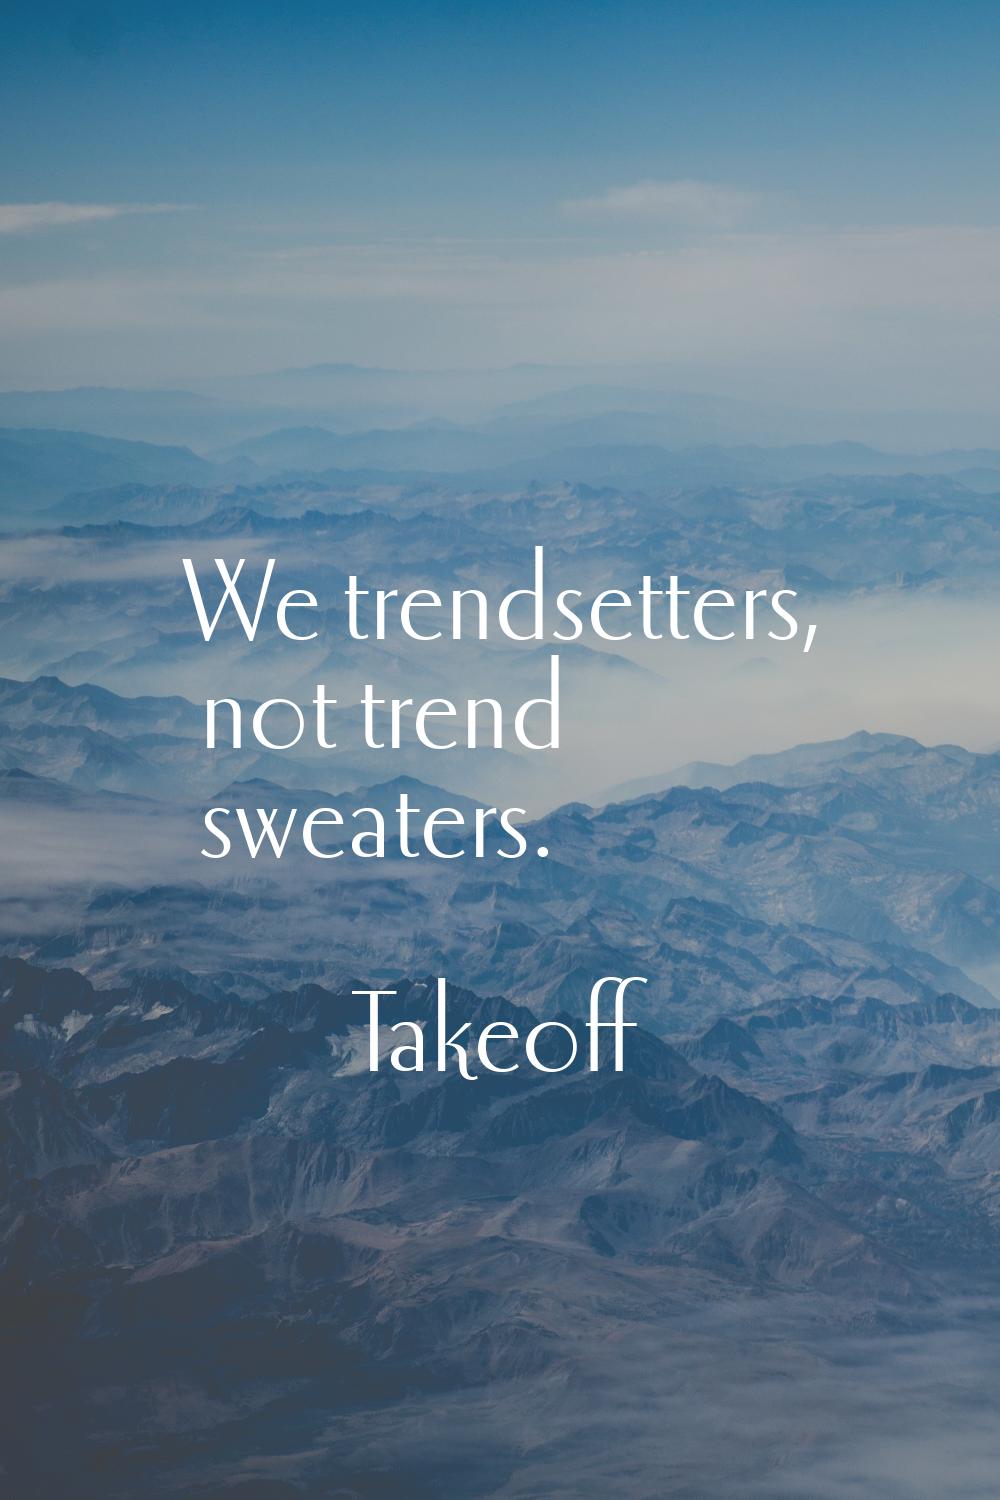 We trendsetters, not trend sweaters.